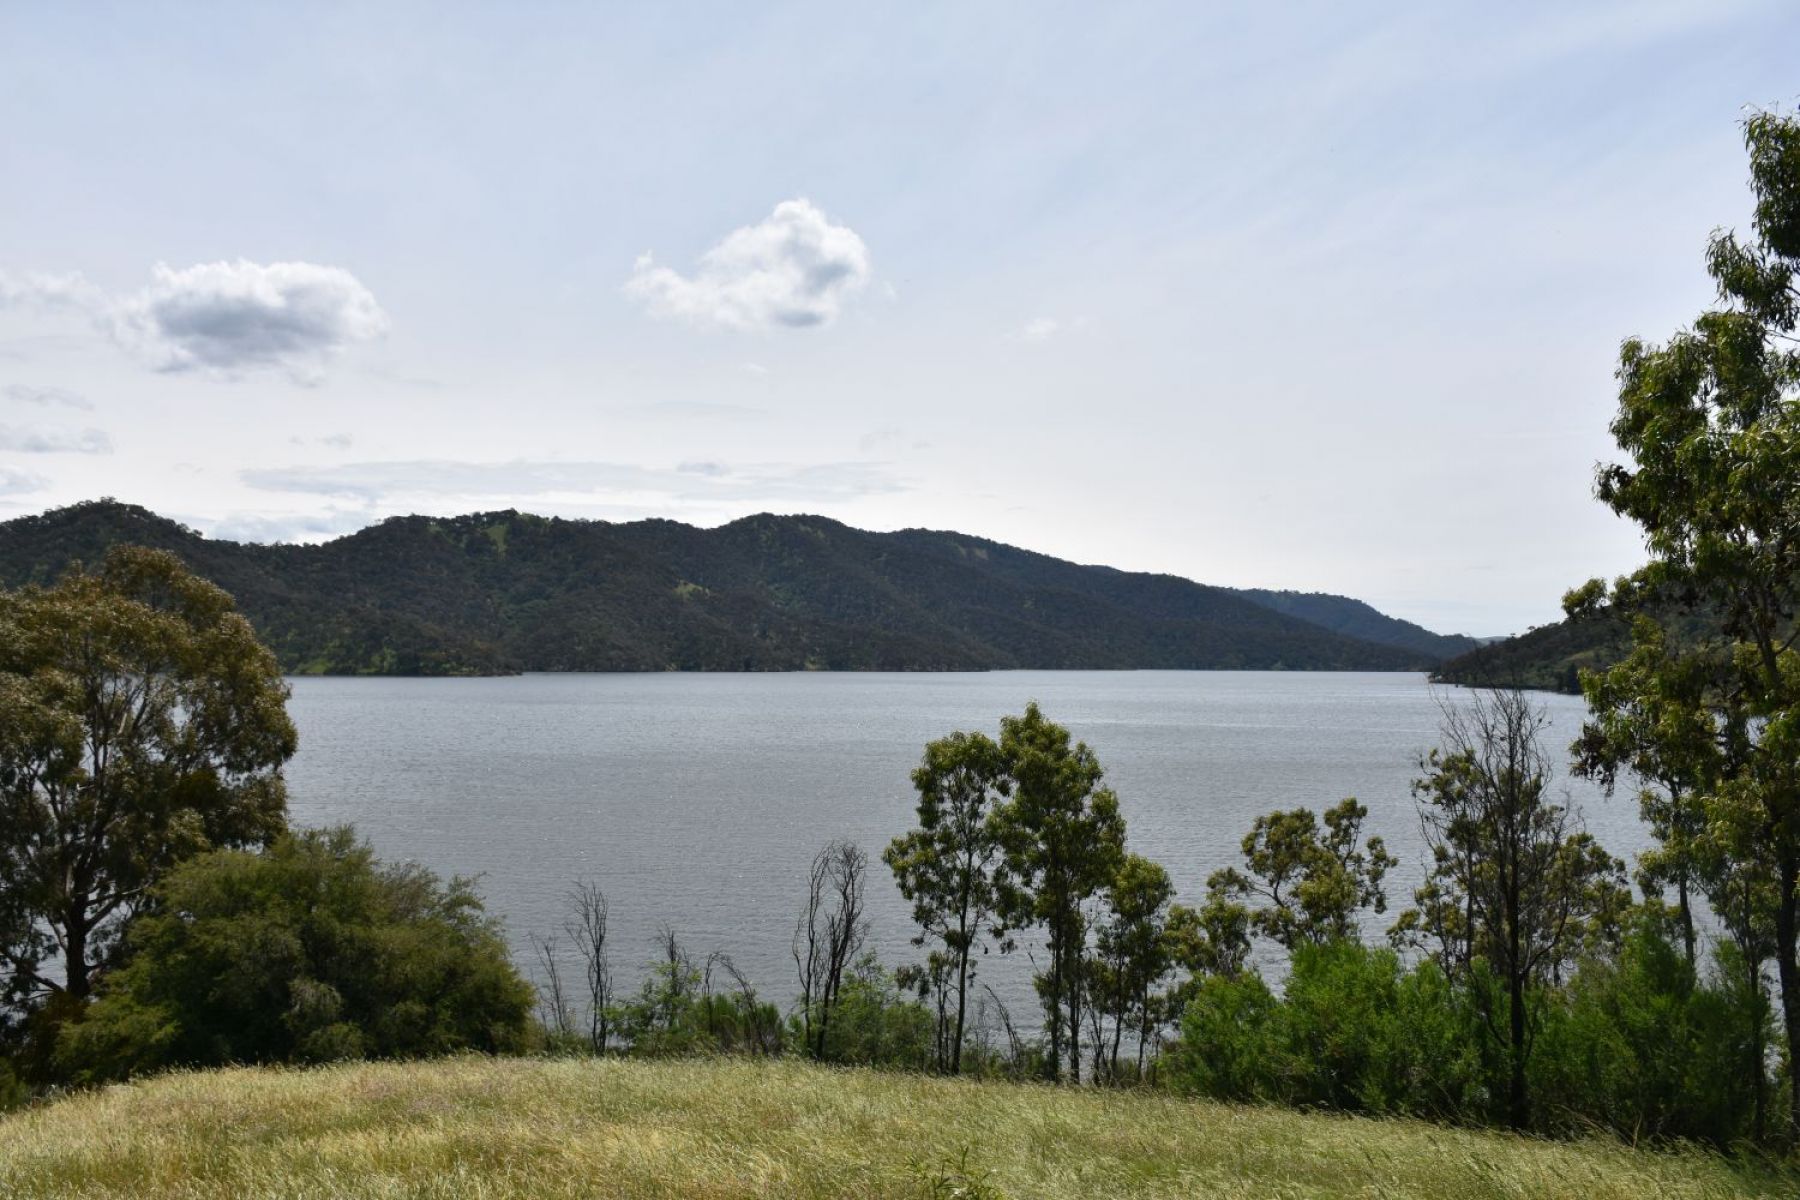 A grassy area overlooking a large lake